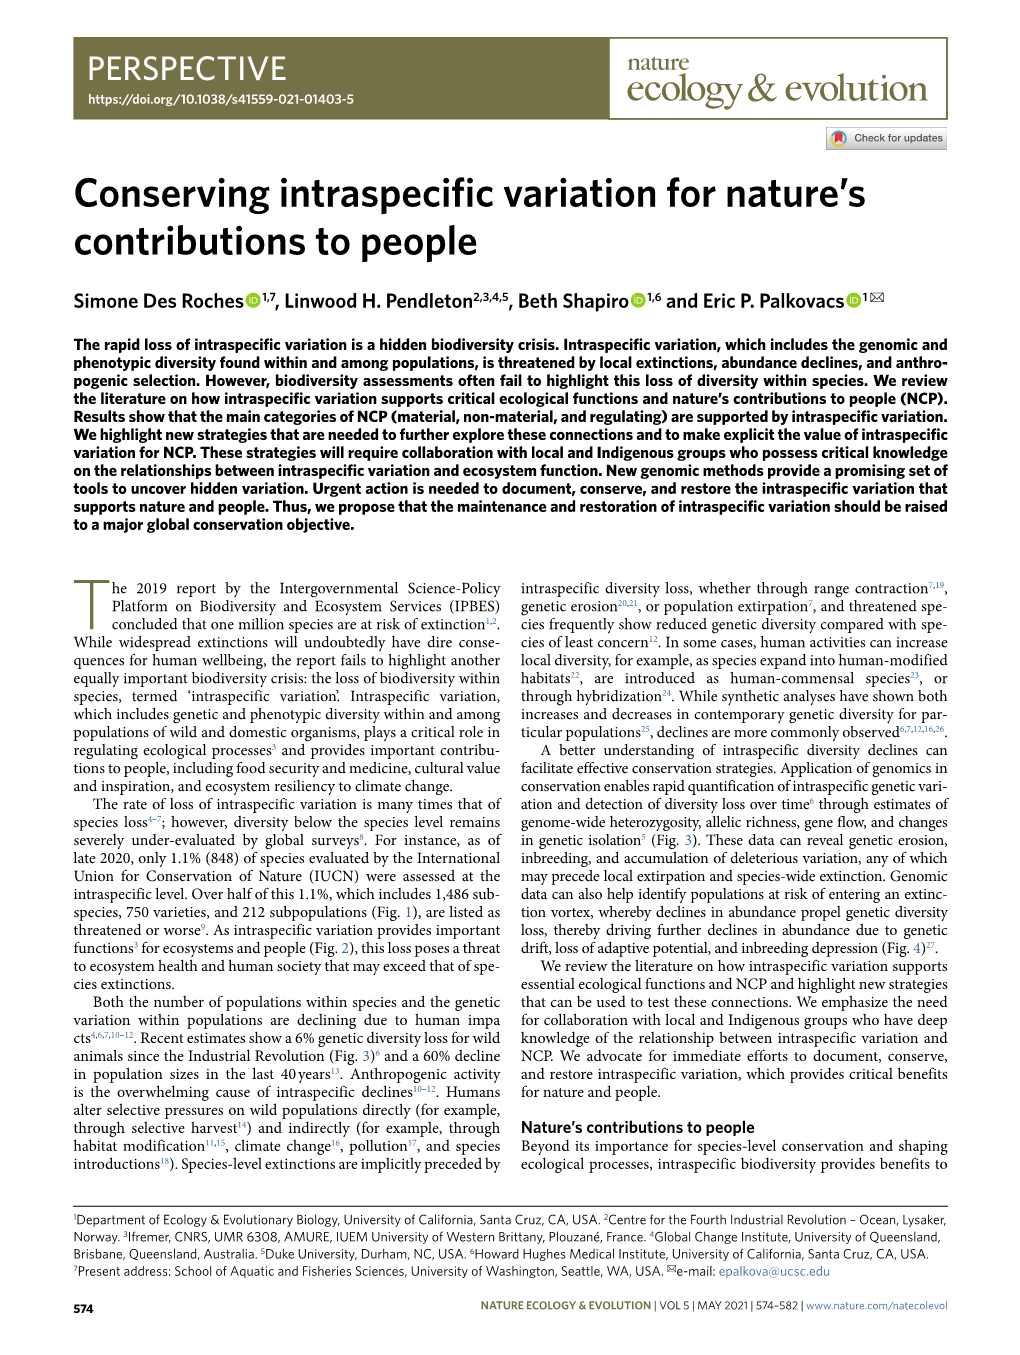 Conserving Intraspecific Variation for Nature's Contributions to People